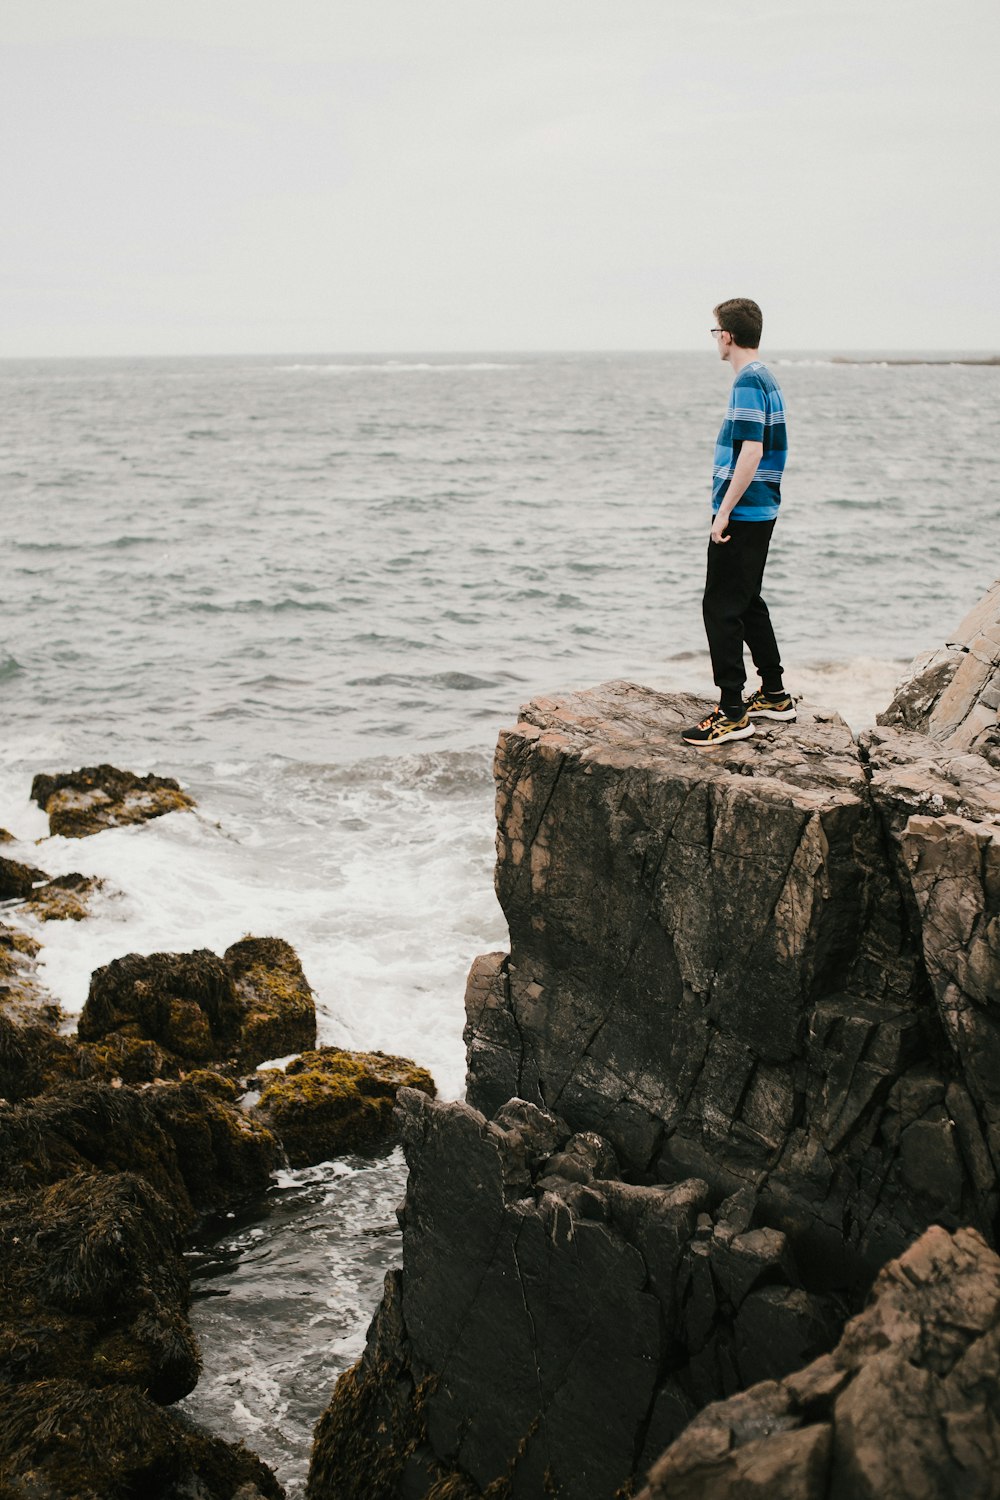 man in blue jacket standing on rock formation near body of water during daytime